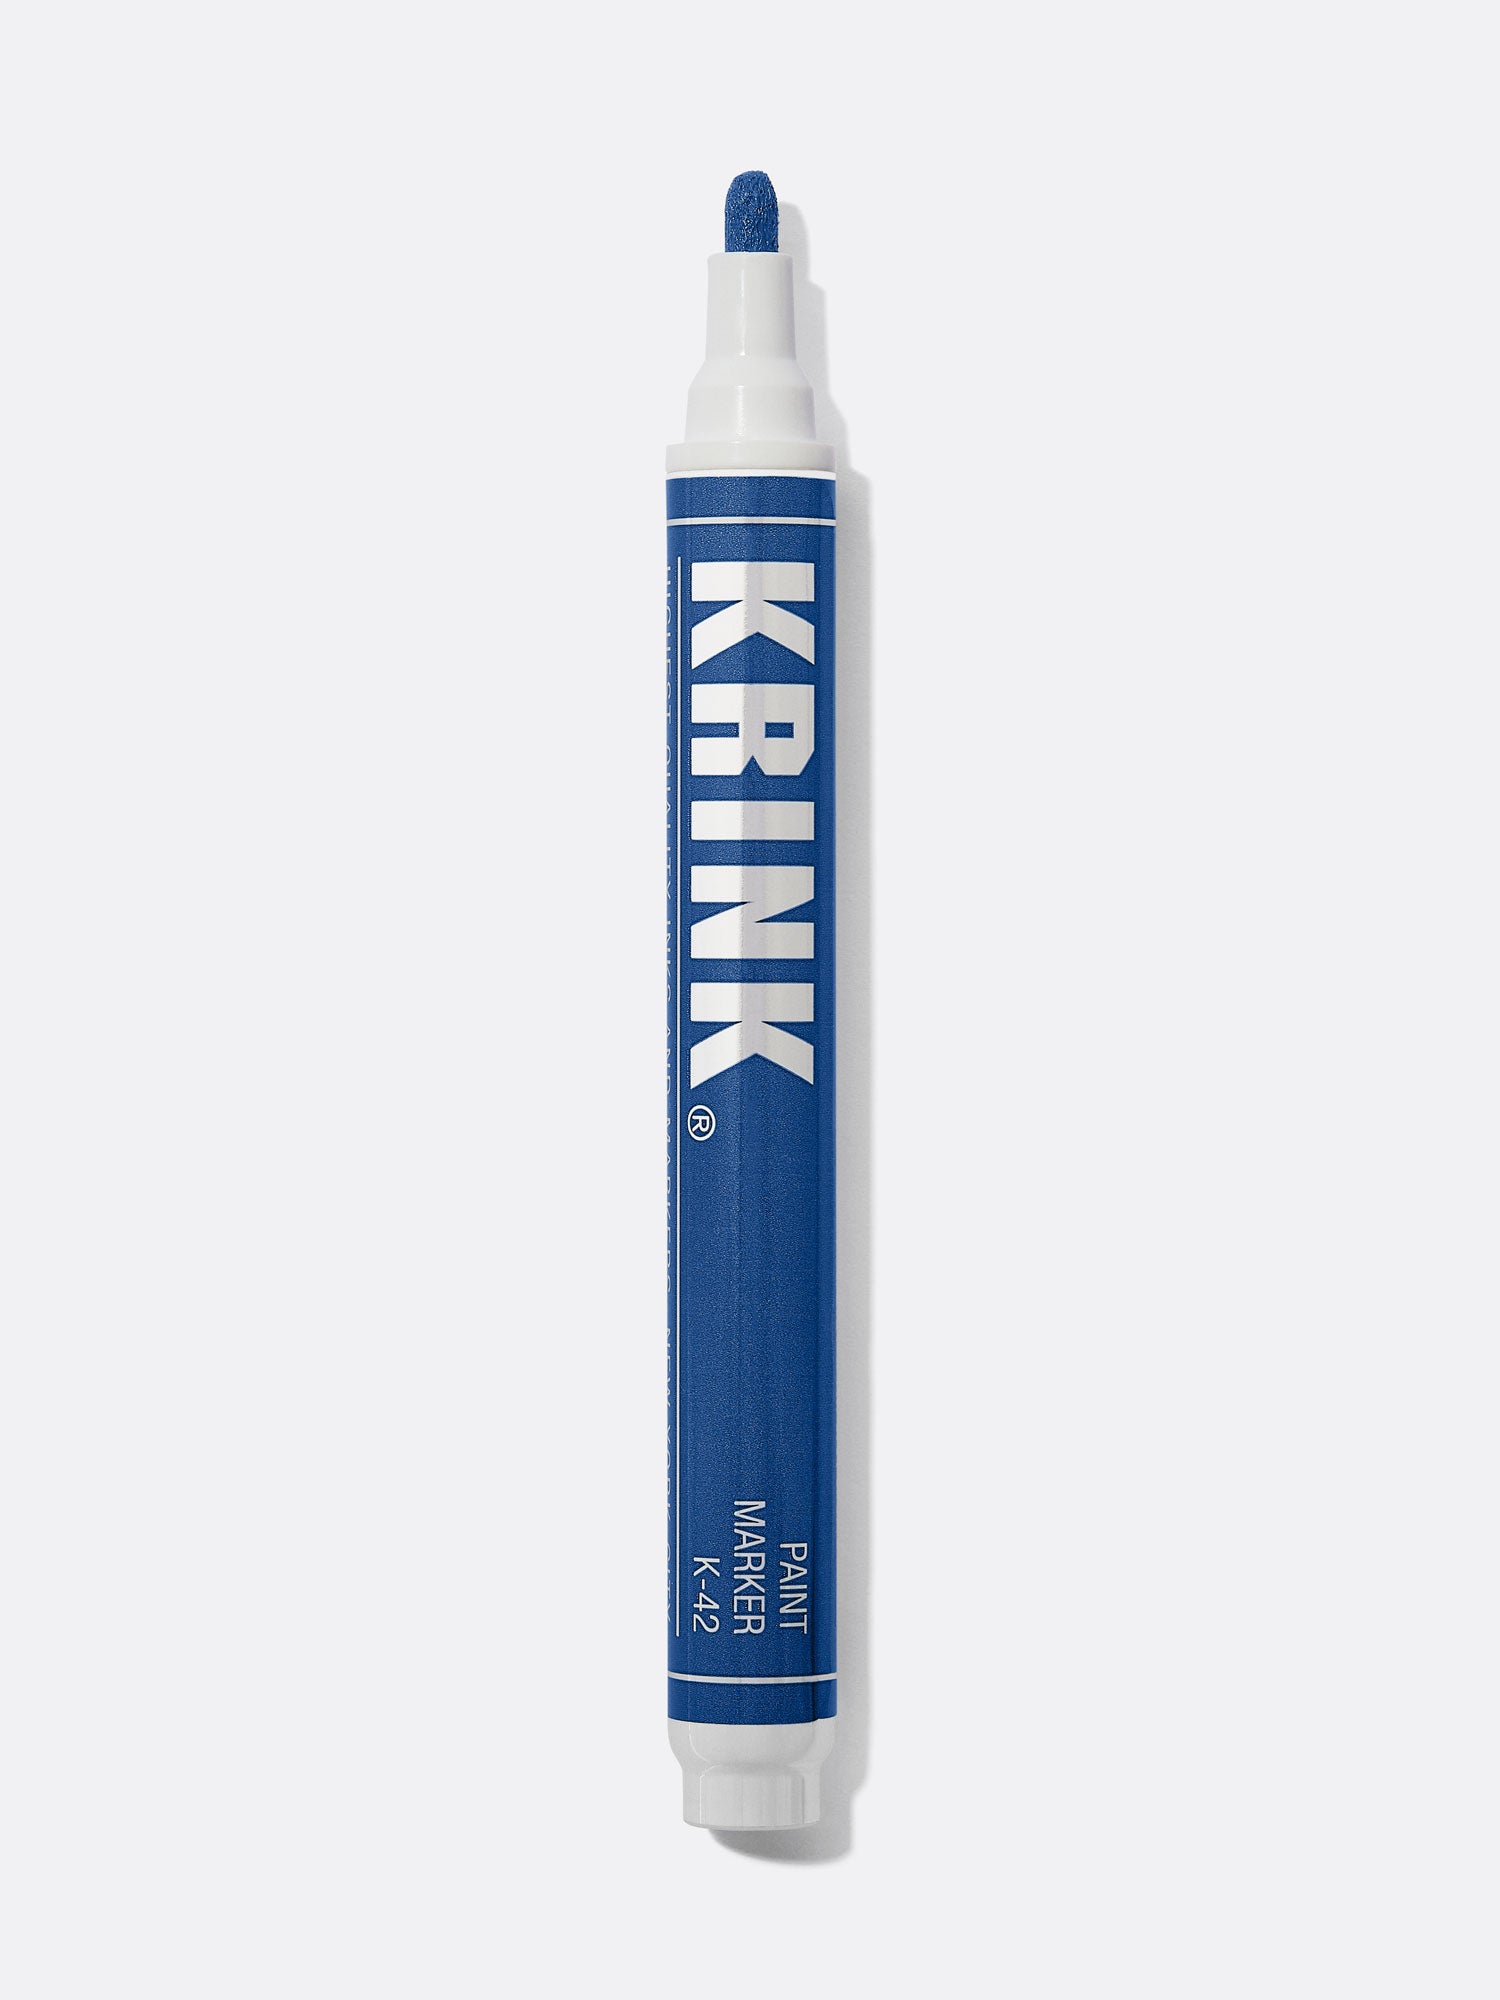 Krink K-75 Black Paint Marker - Vibrant and Opaque Fine Art Paint Pen for  Any Surface - Permanent Graffiti Markers - Krink Paint Markers with